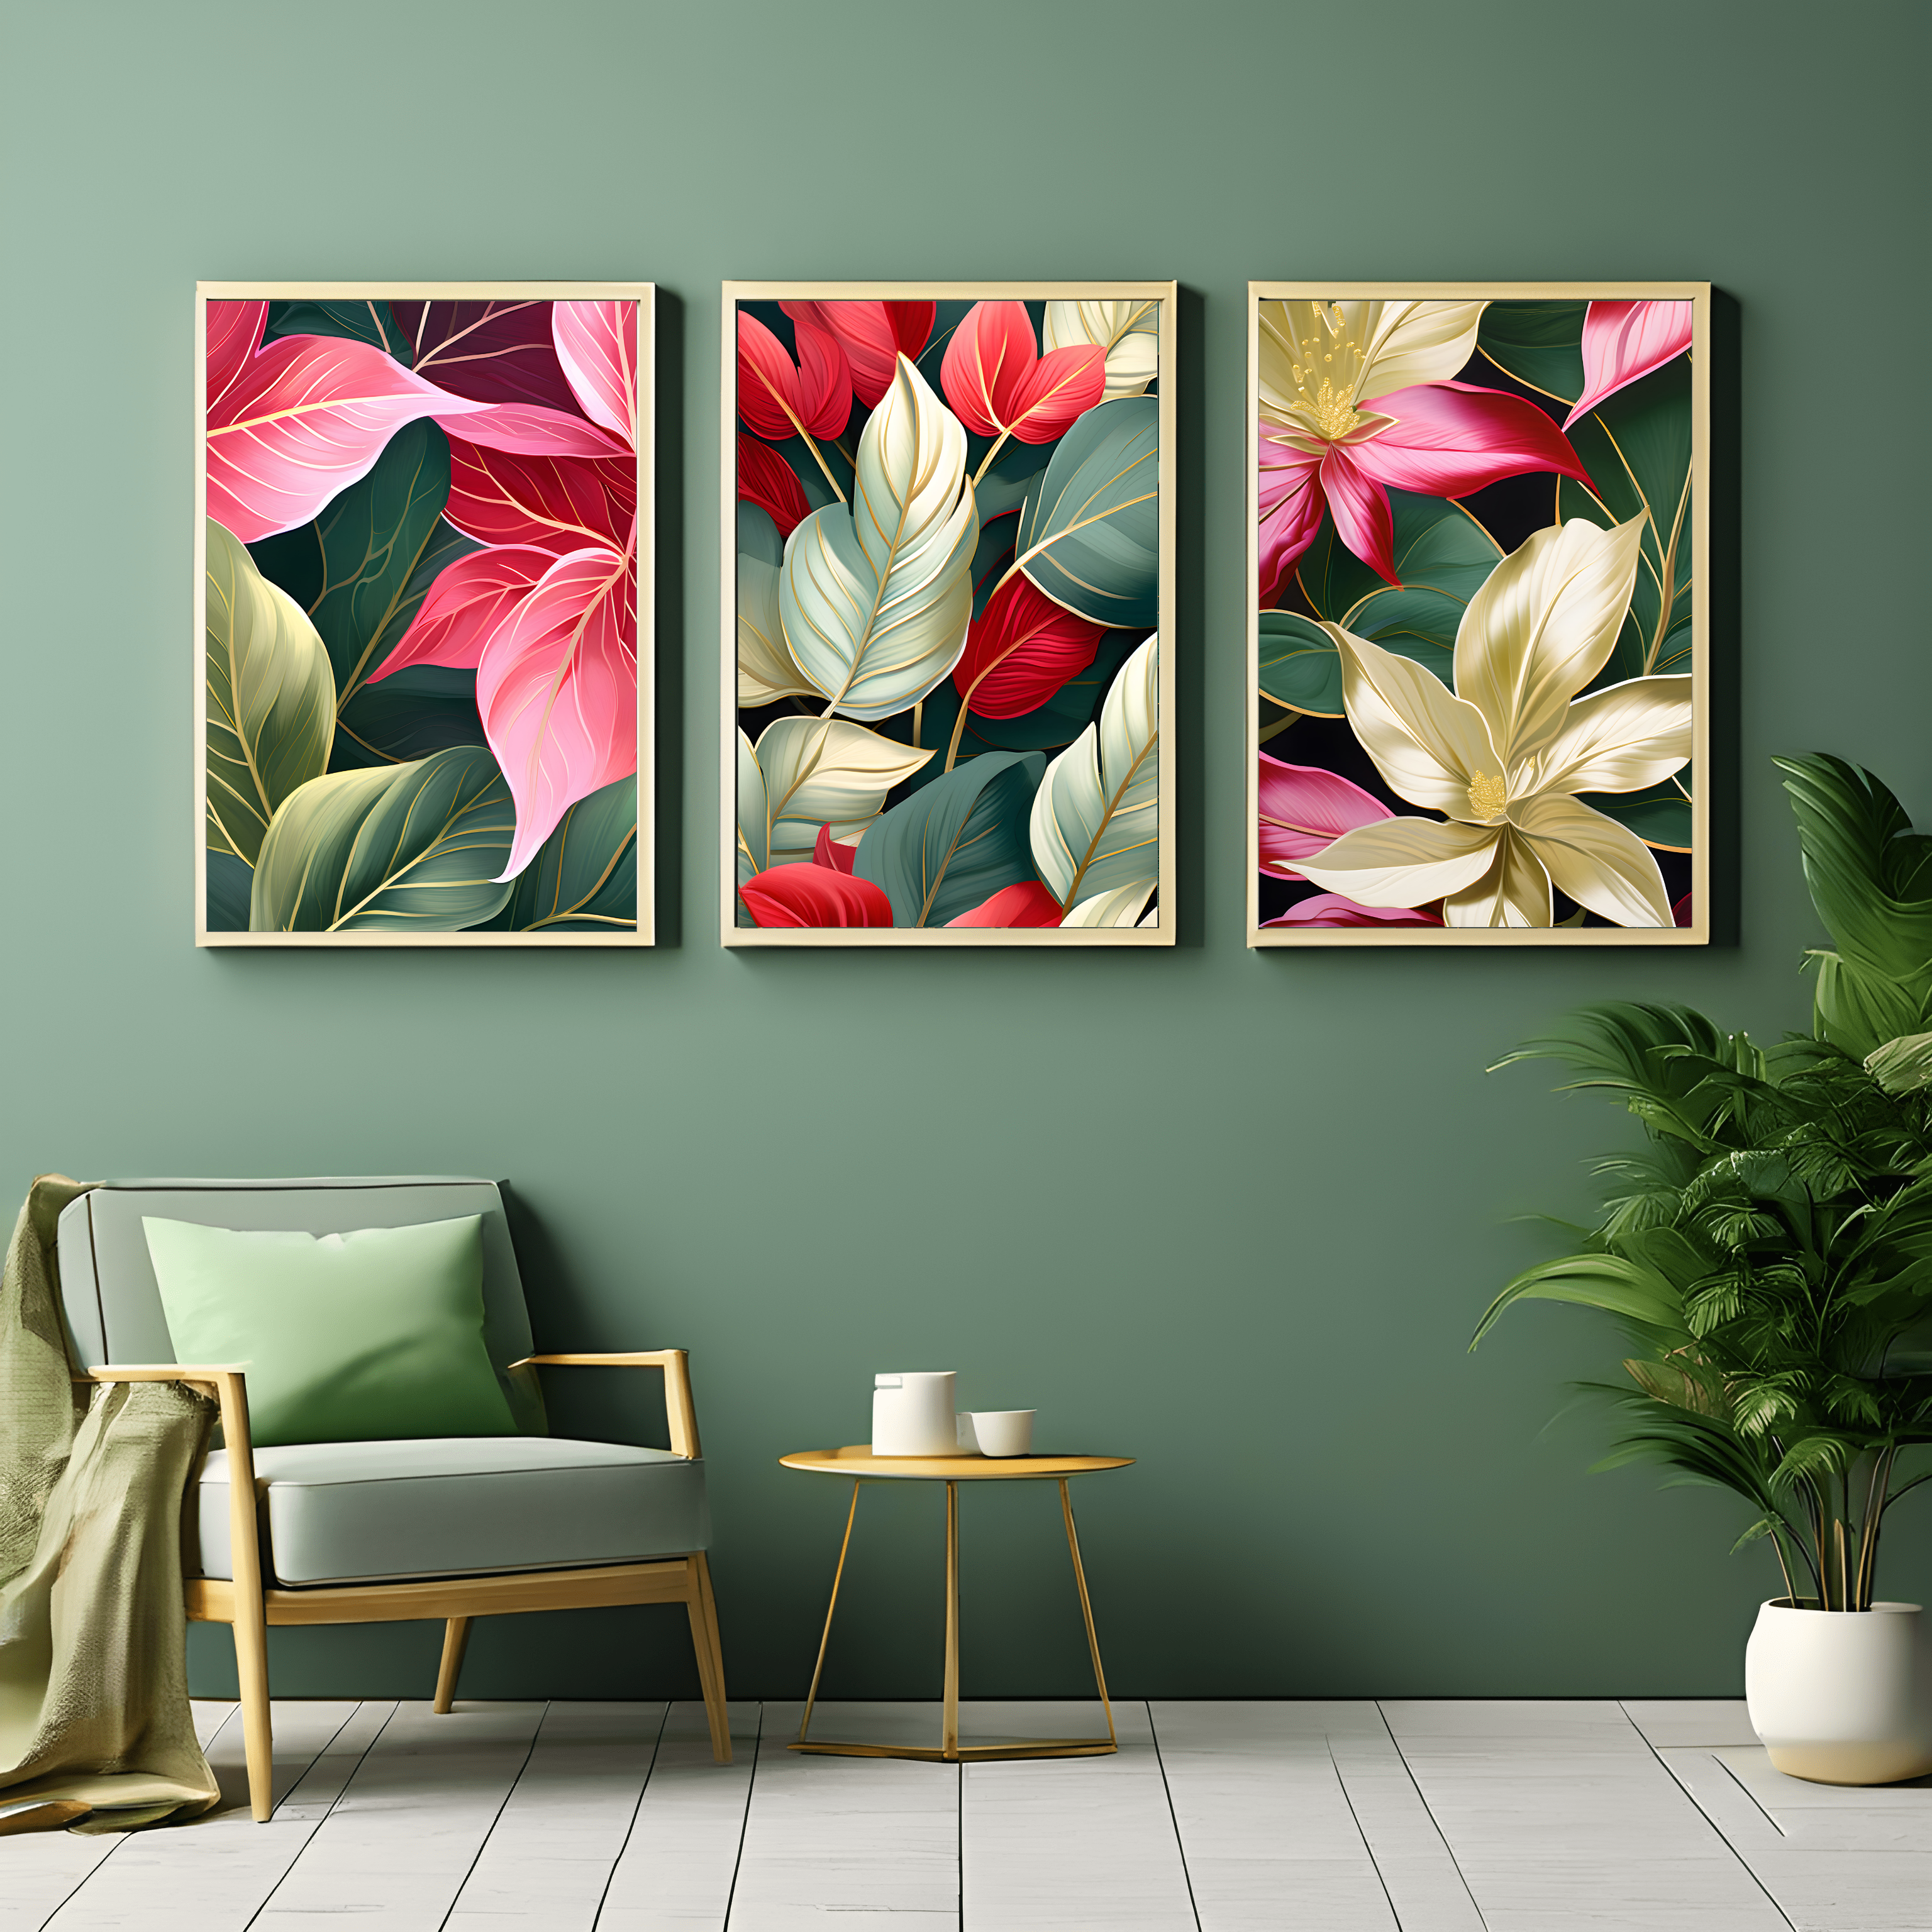 Three Luxury Red, Pink, Green and Golden Leaves Art Print Set, Wall Art, Digital Download